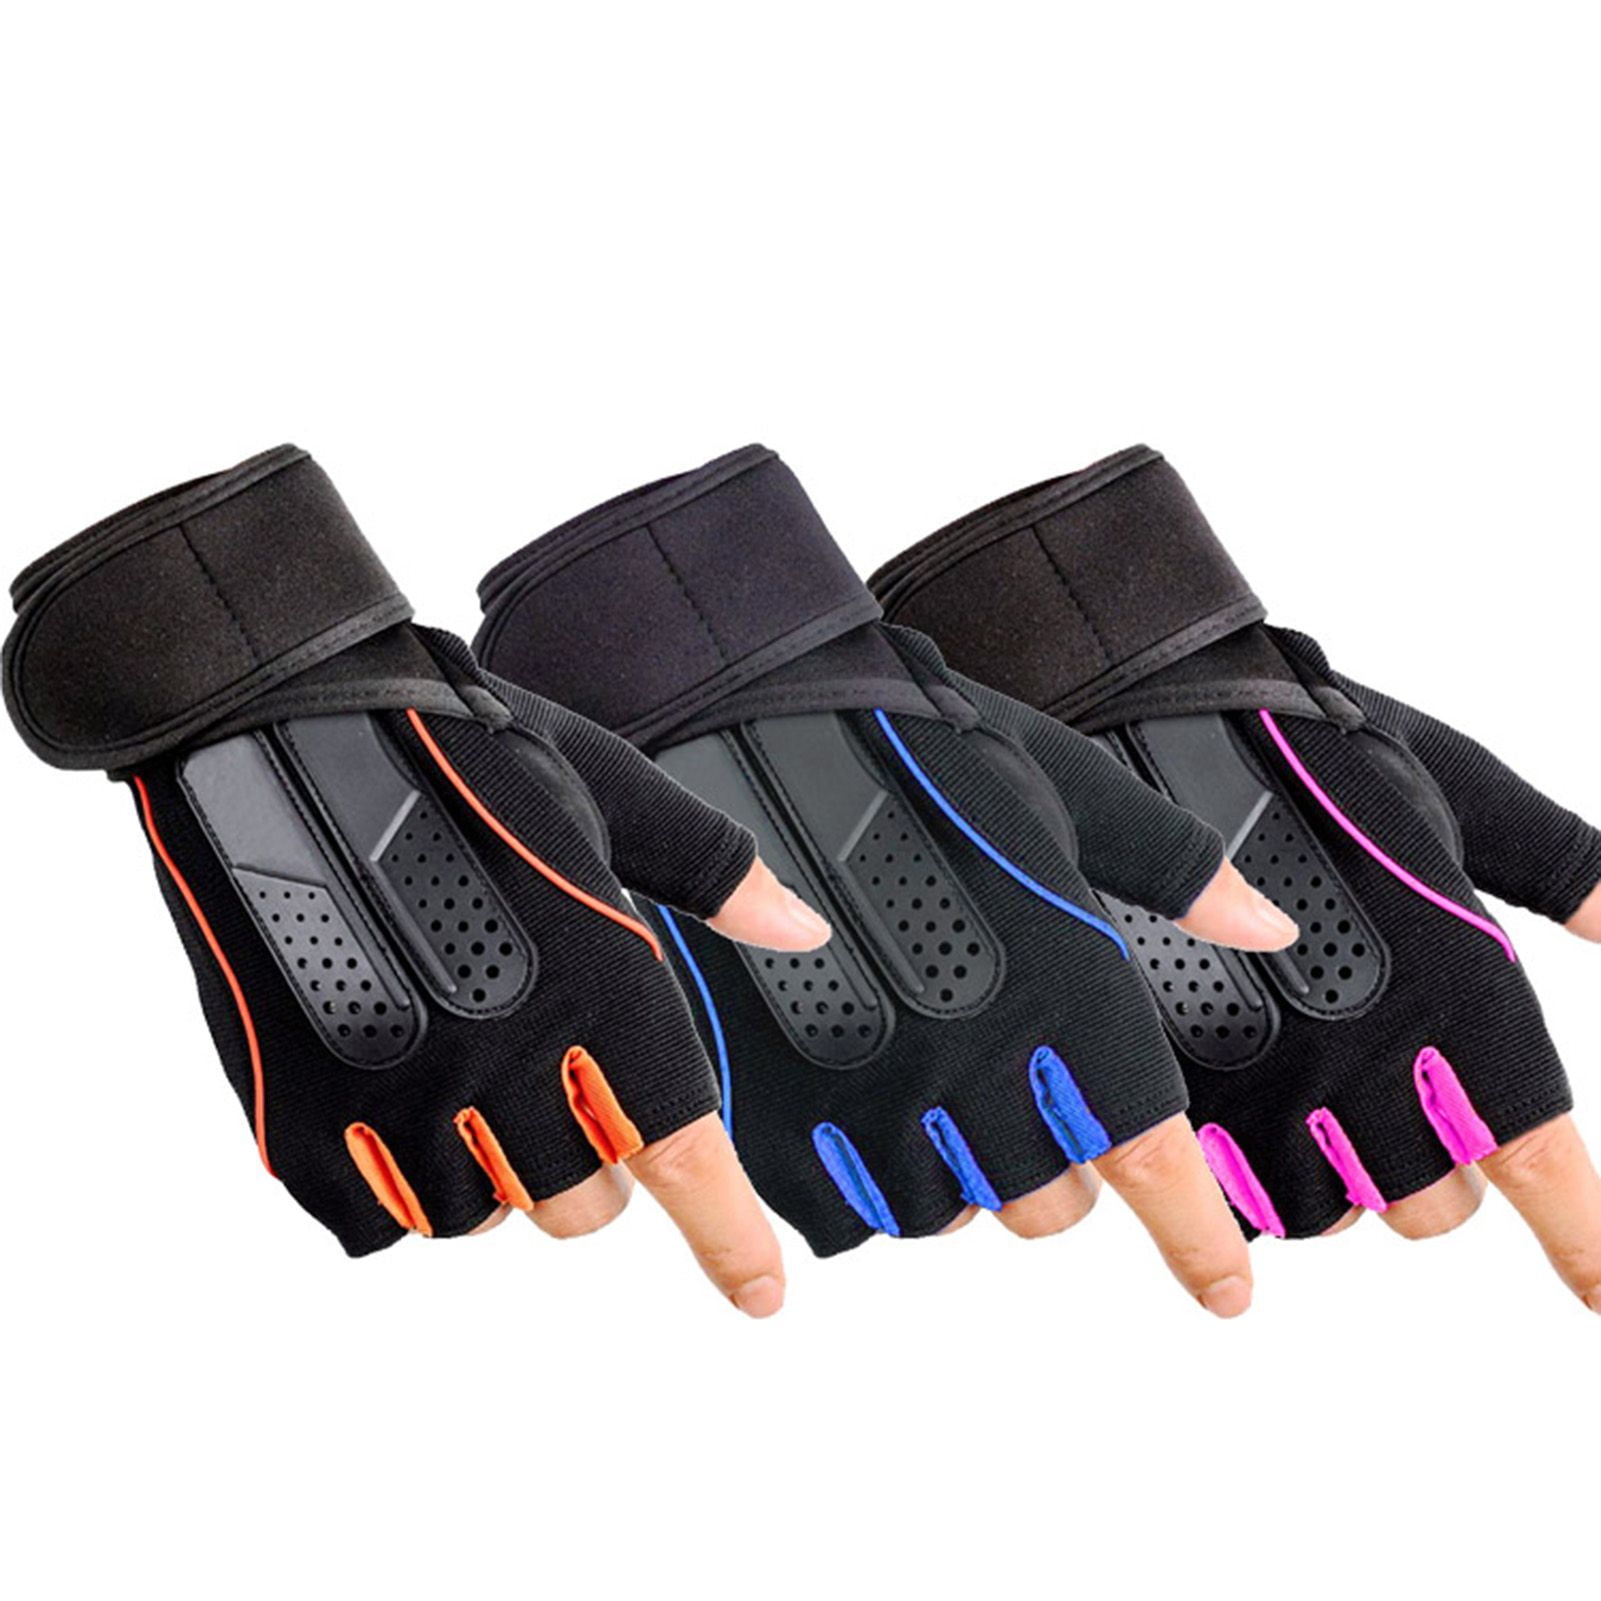 COFIT Breathable Workout Gloves, Antislip Weight Lifting Gym